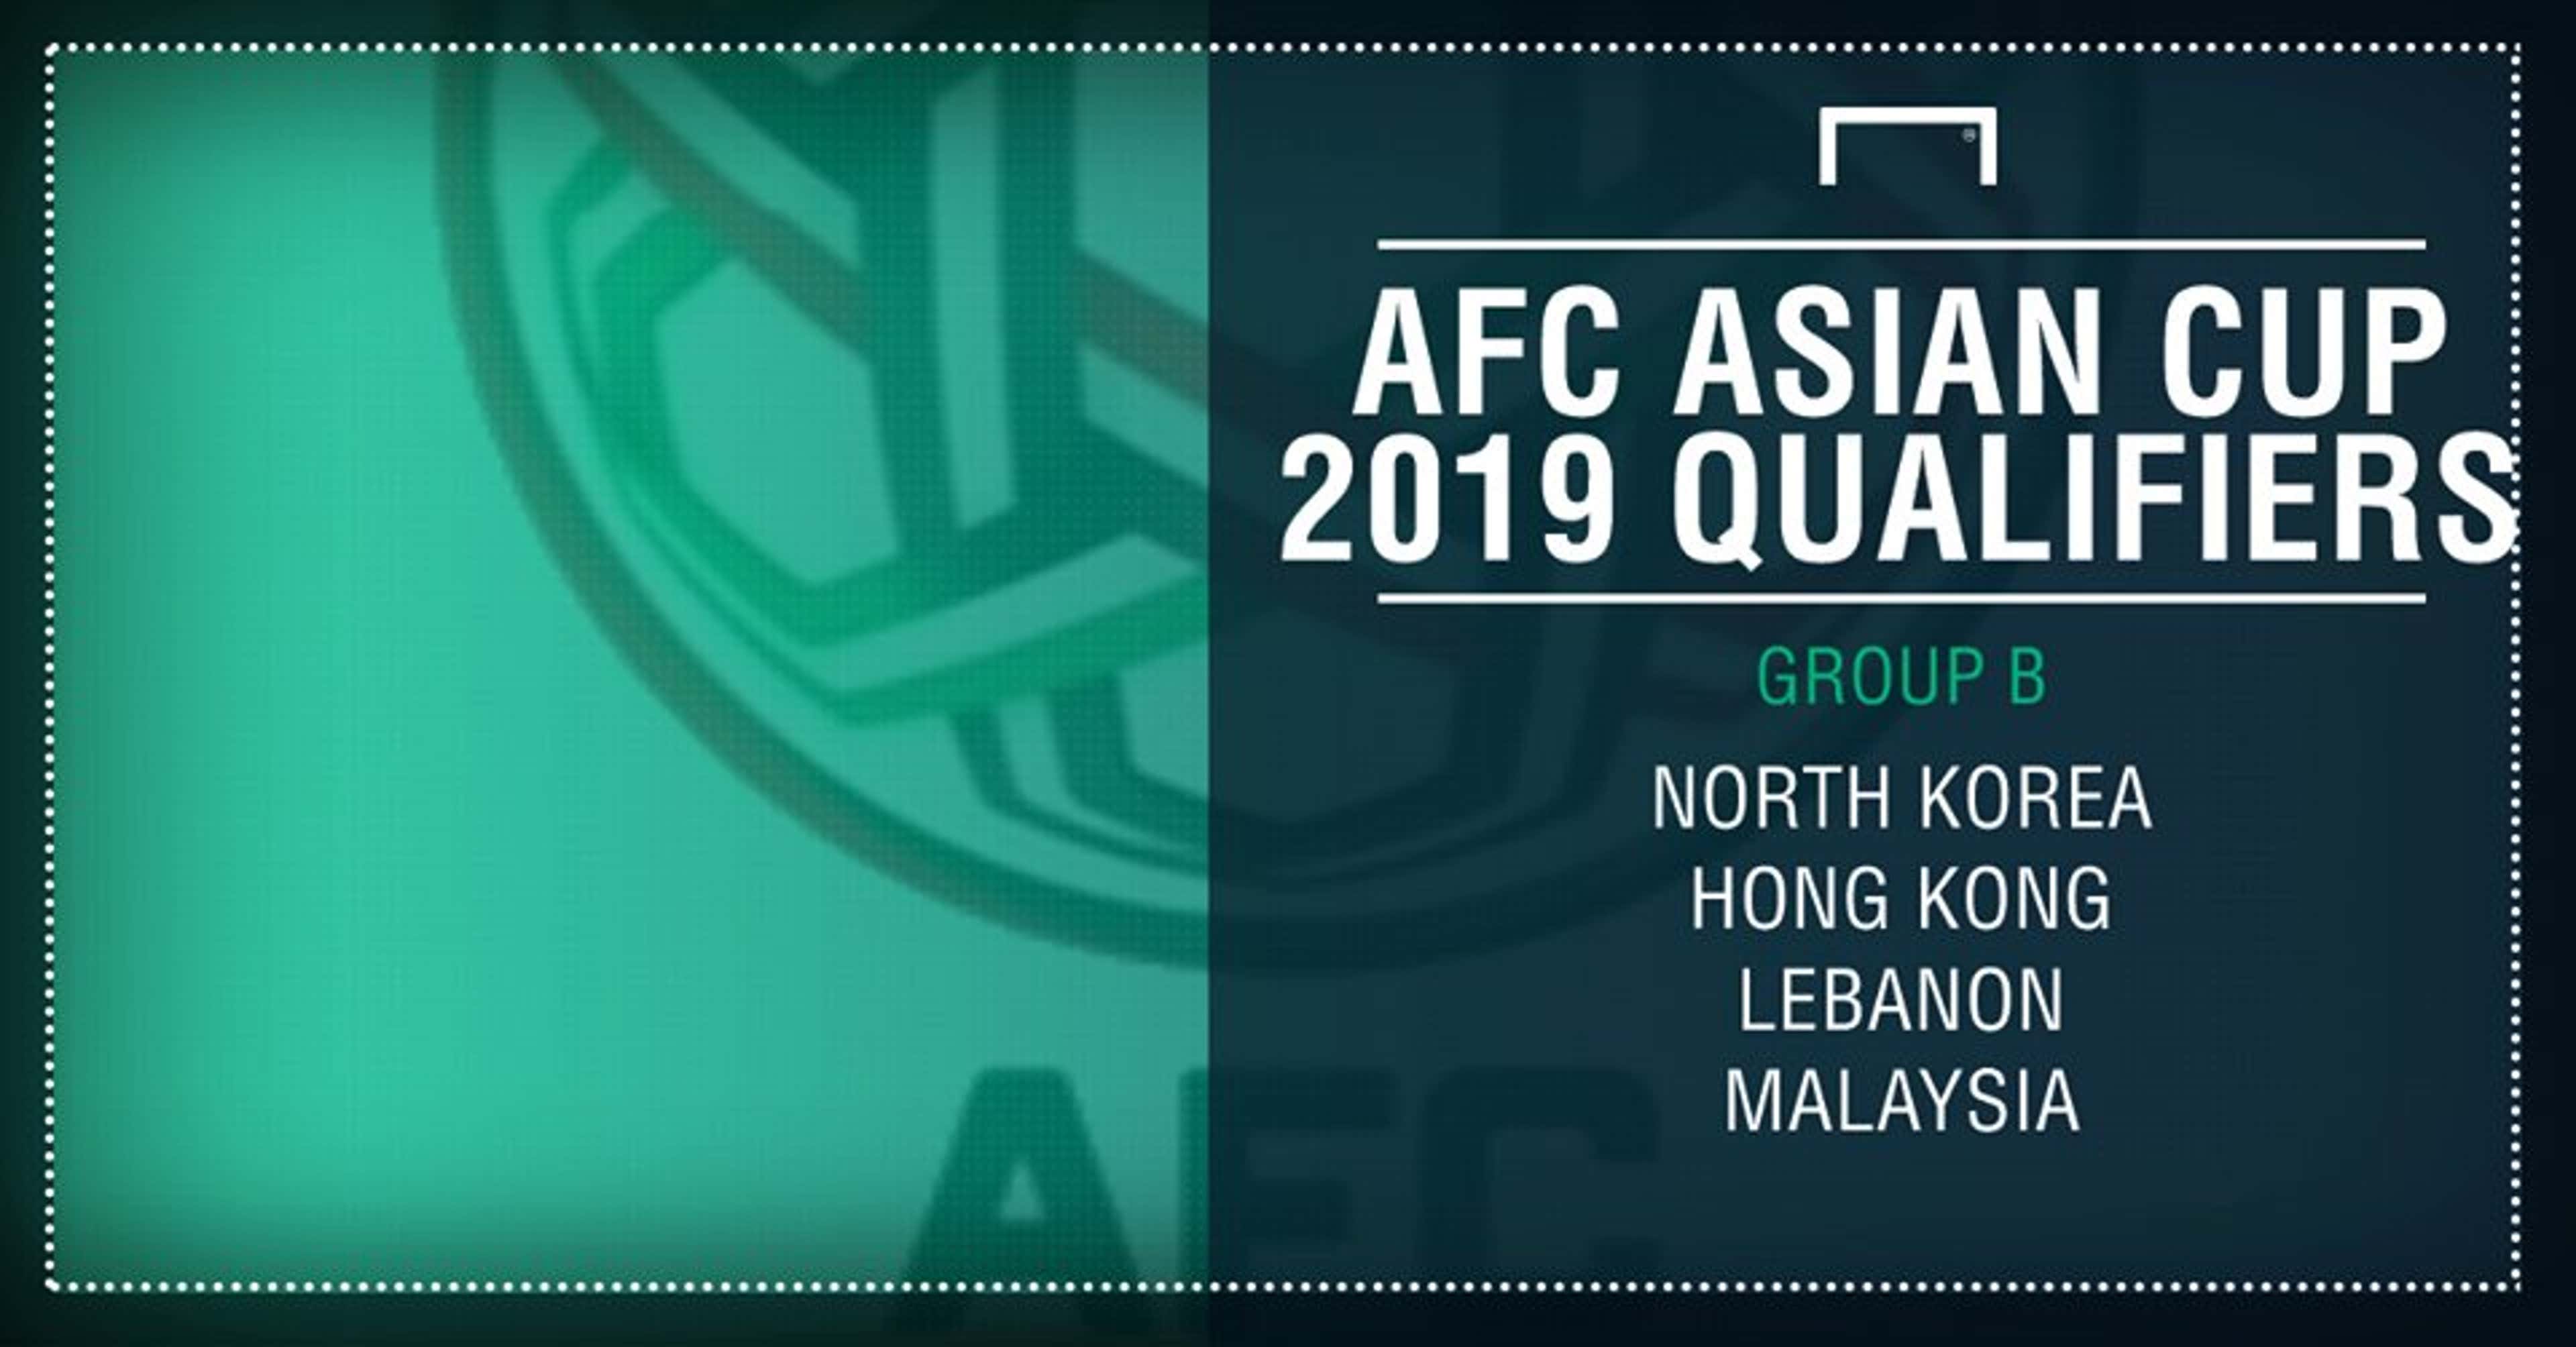 2019 Asian Cup qualifiers Group B